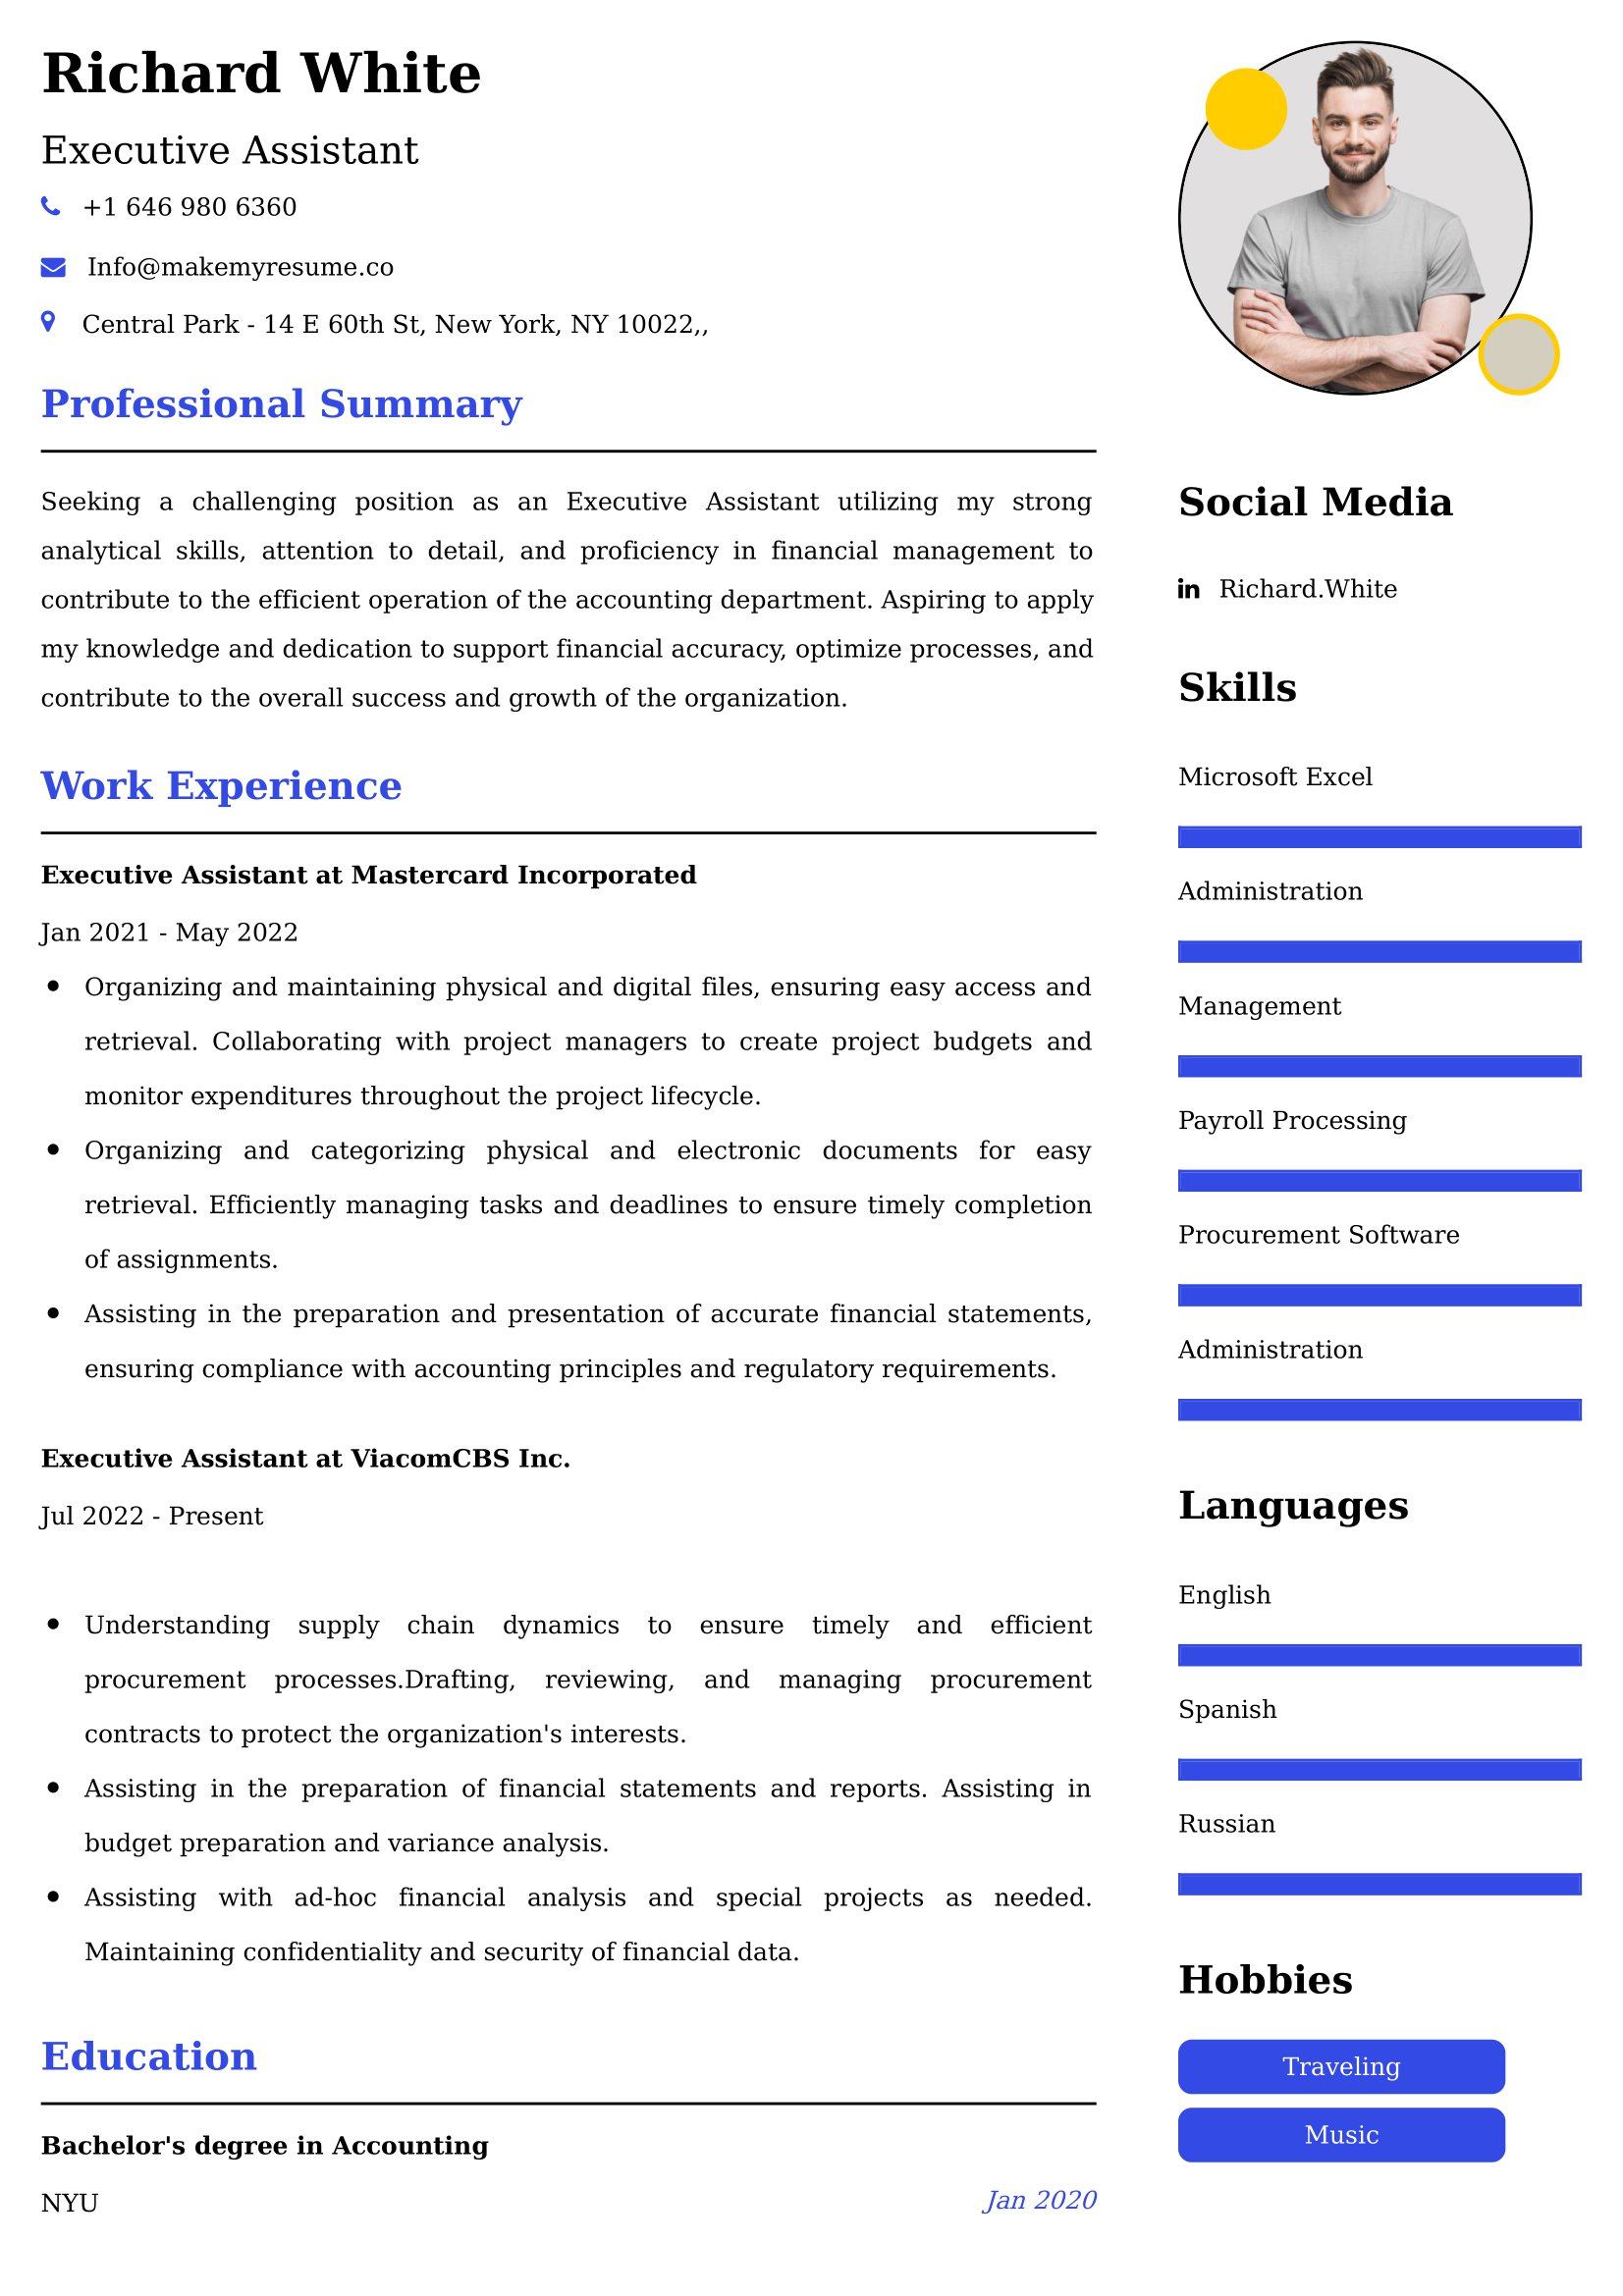 Executive Assistant Resume Examples - Australian Format and Tips